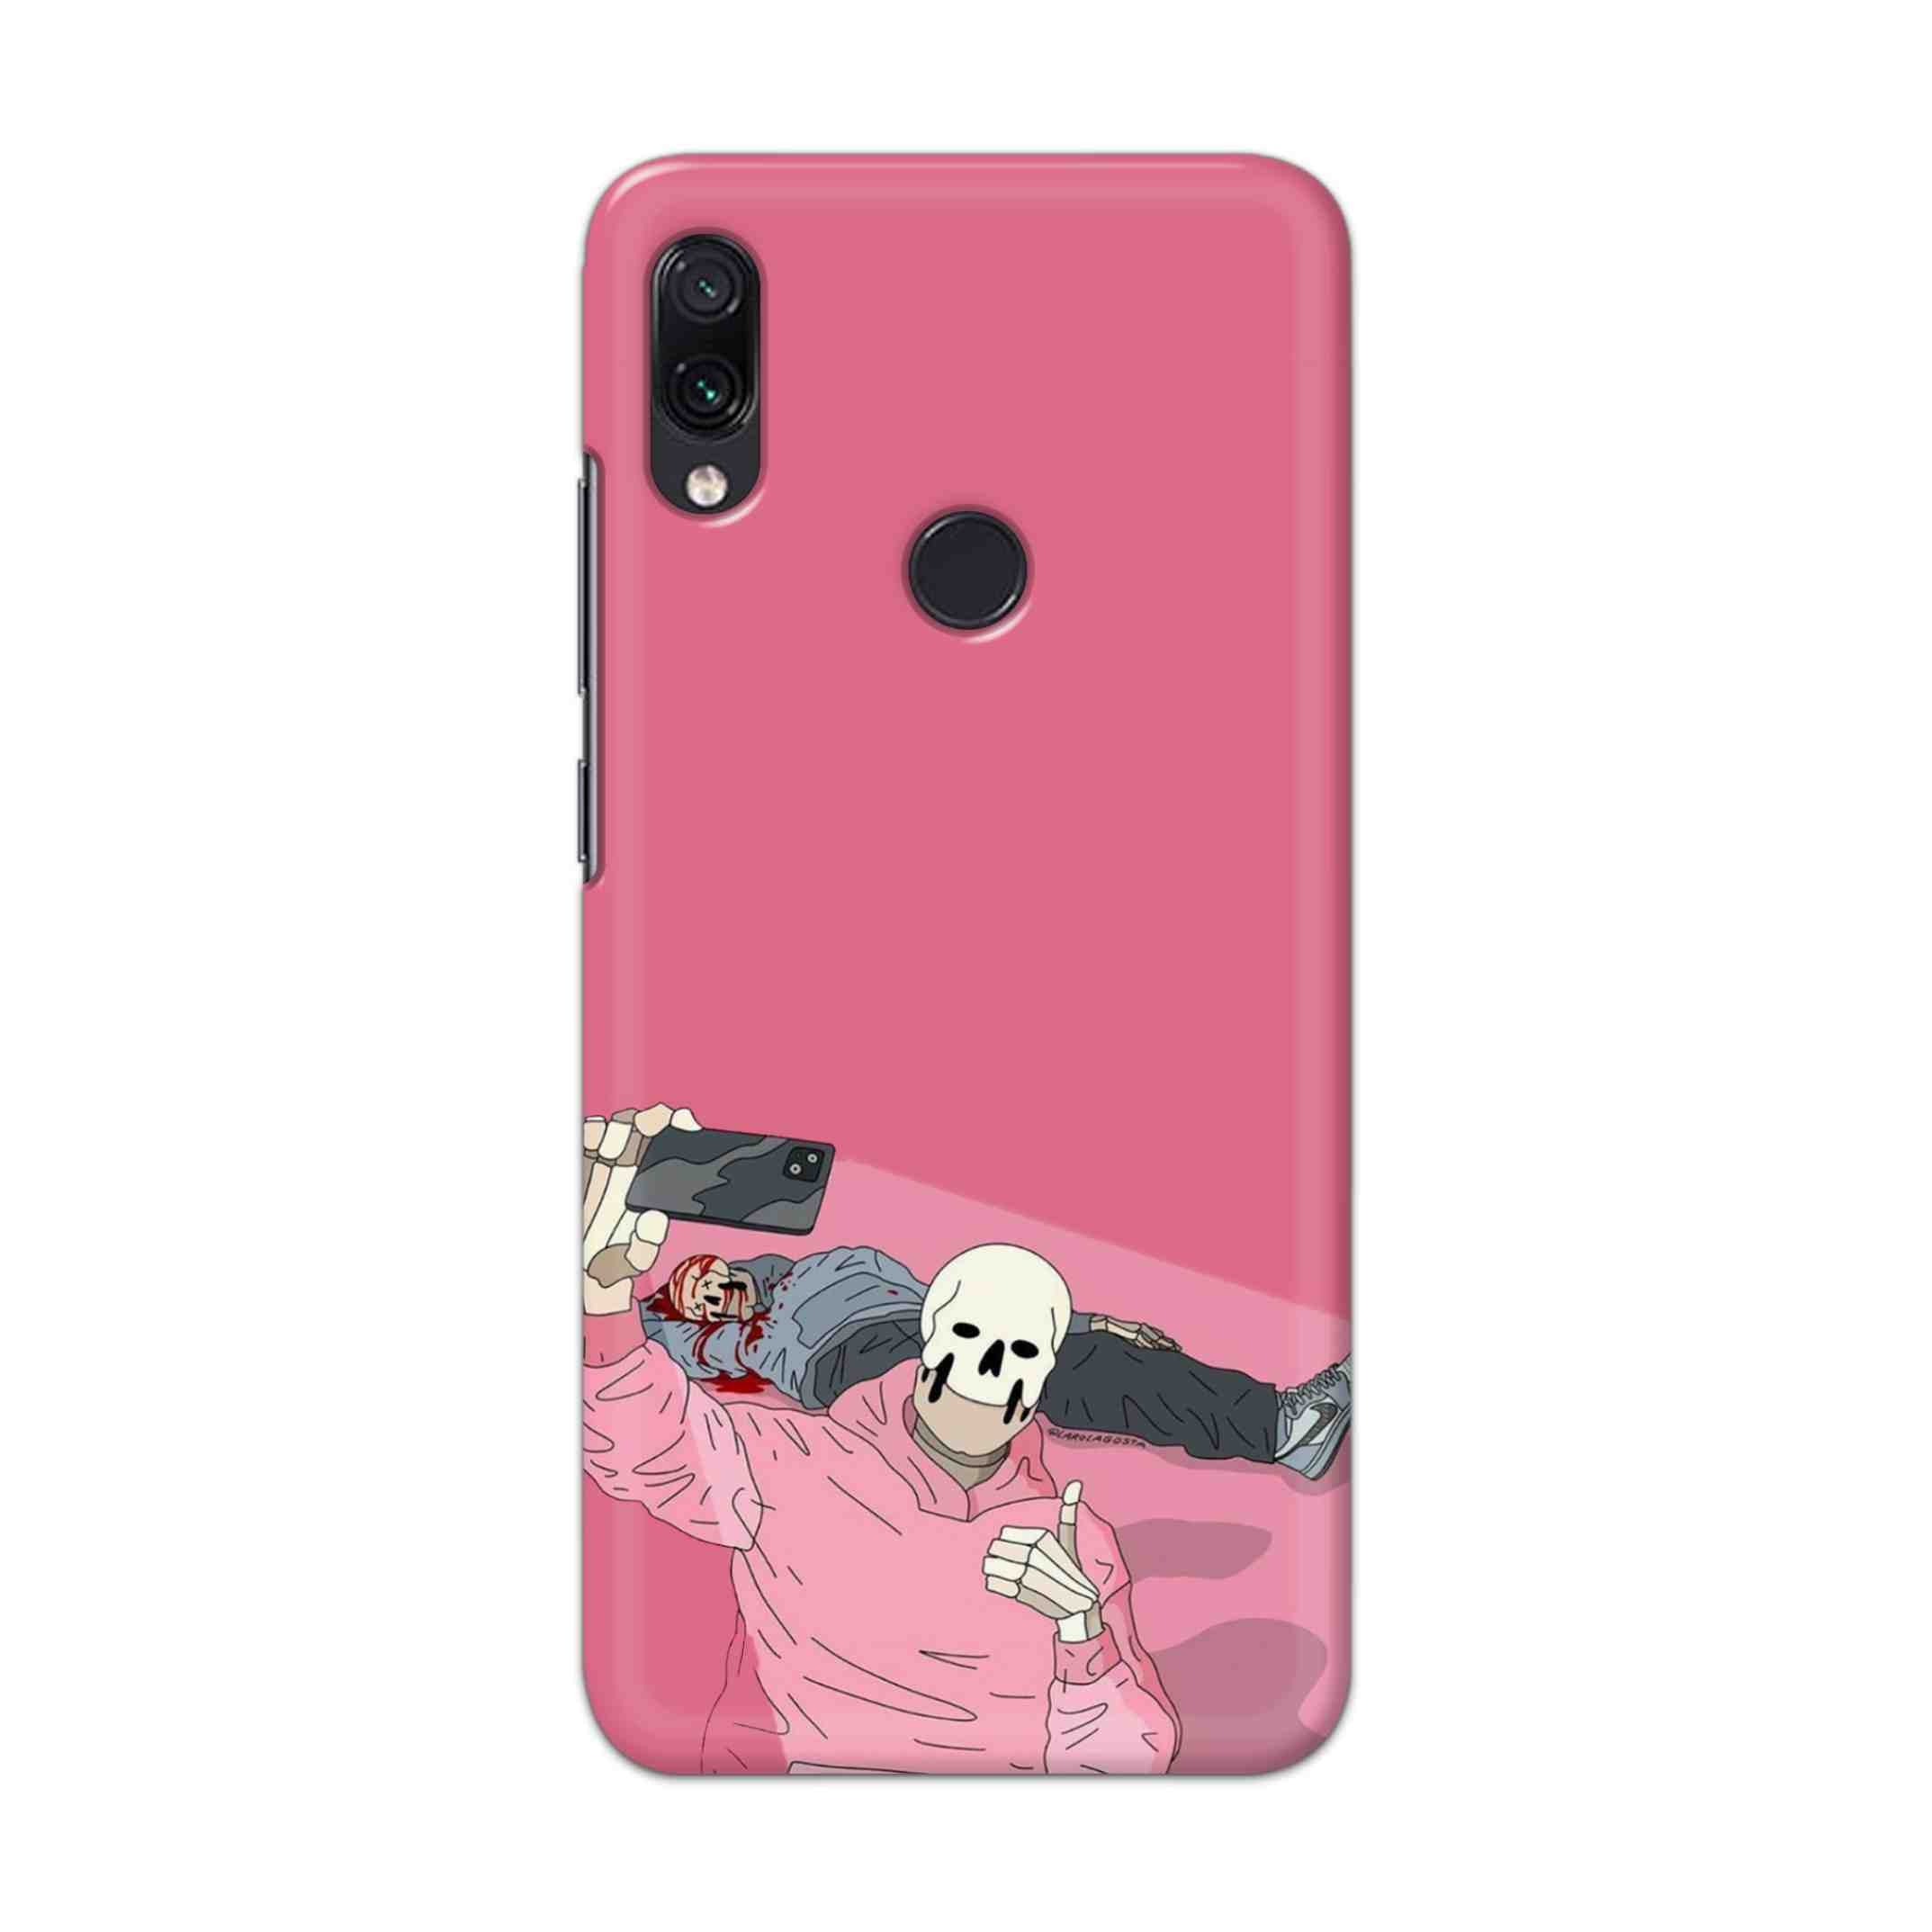 Buy Selfie Hard Back Mobile Phone Case Cover For Xiaomi Redmi 7 Online